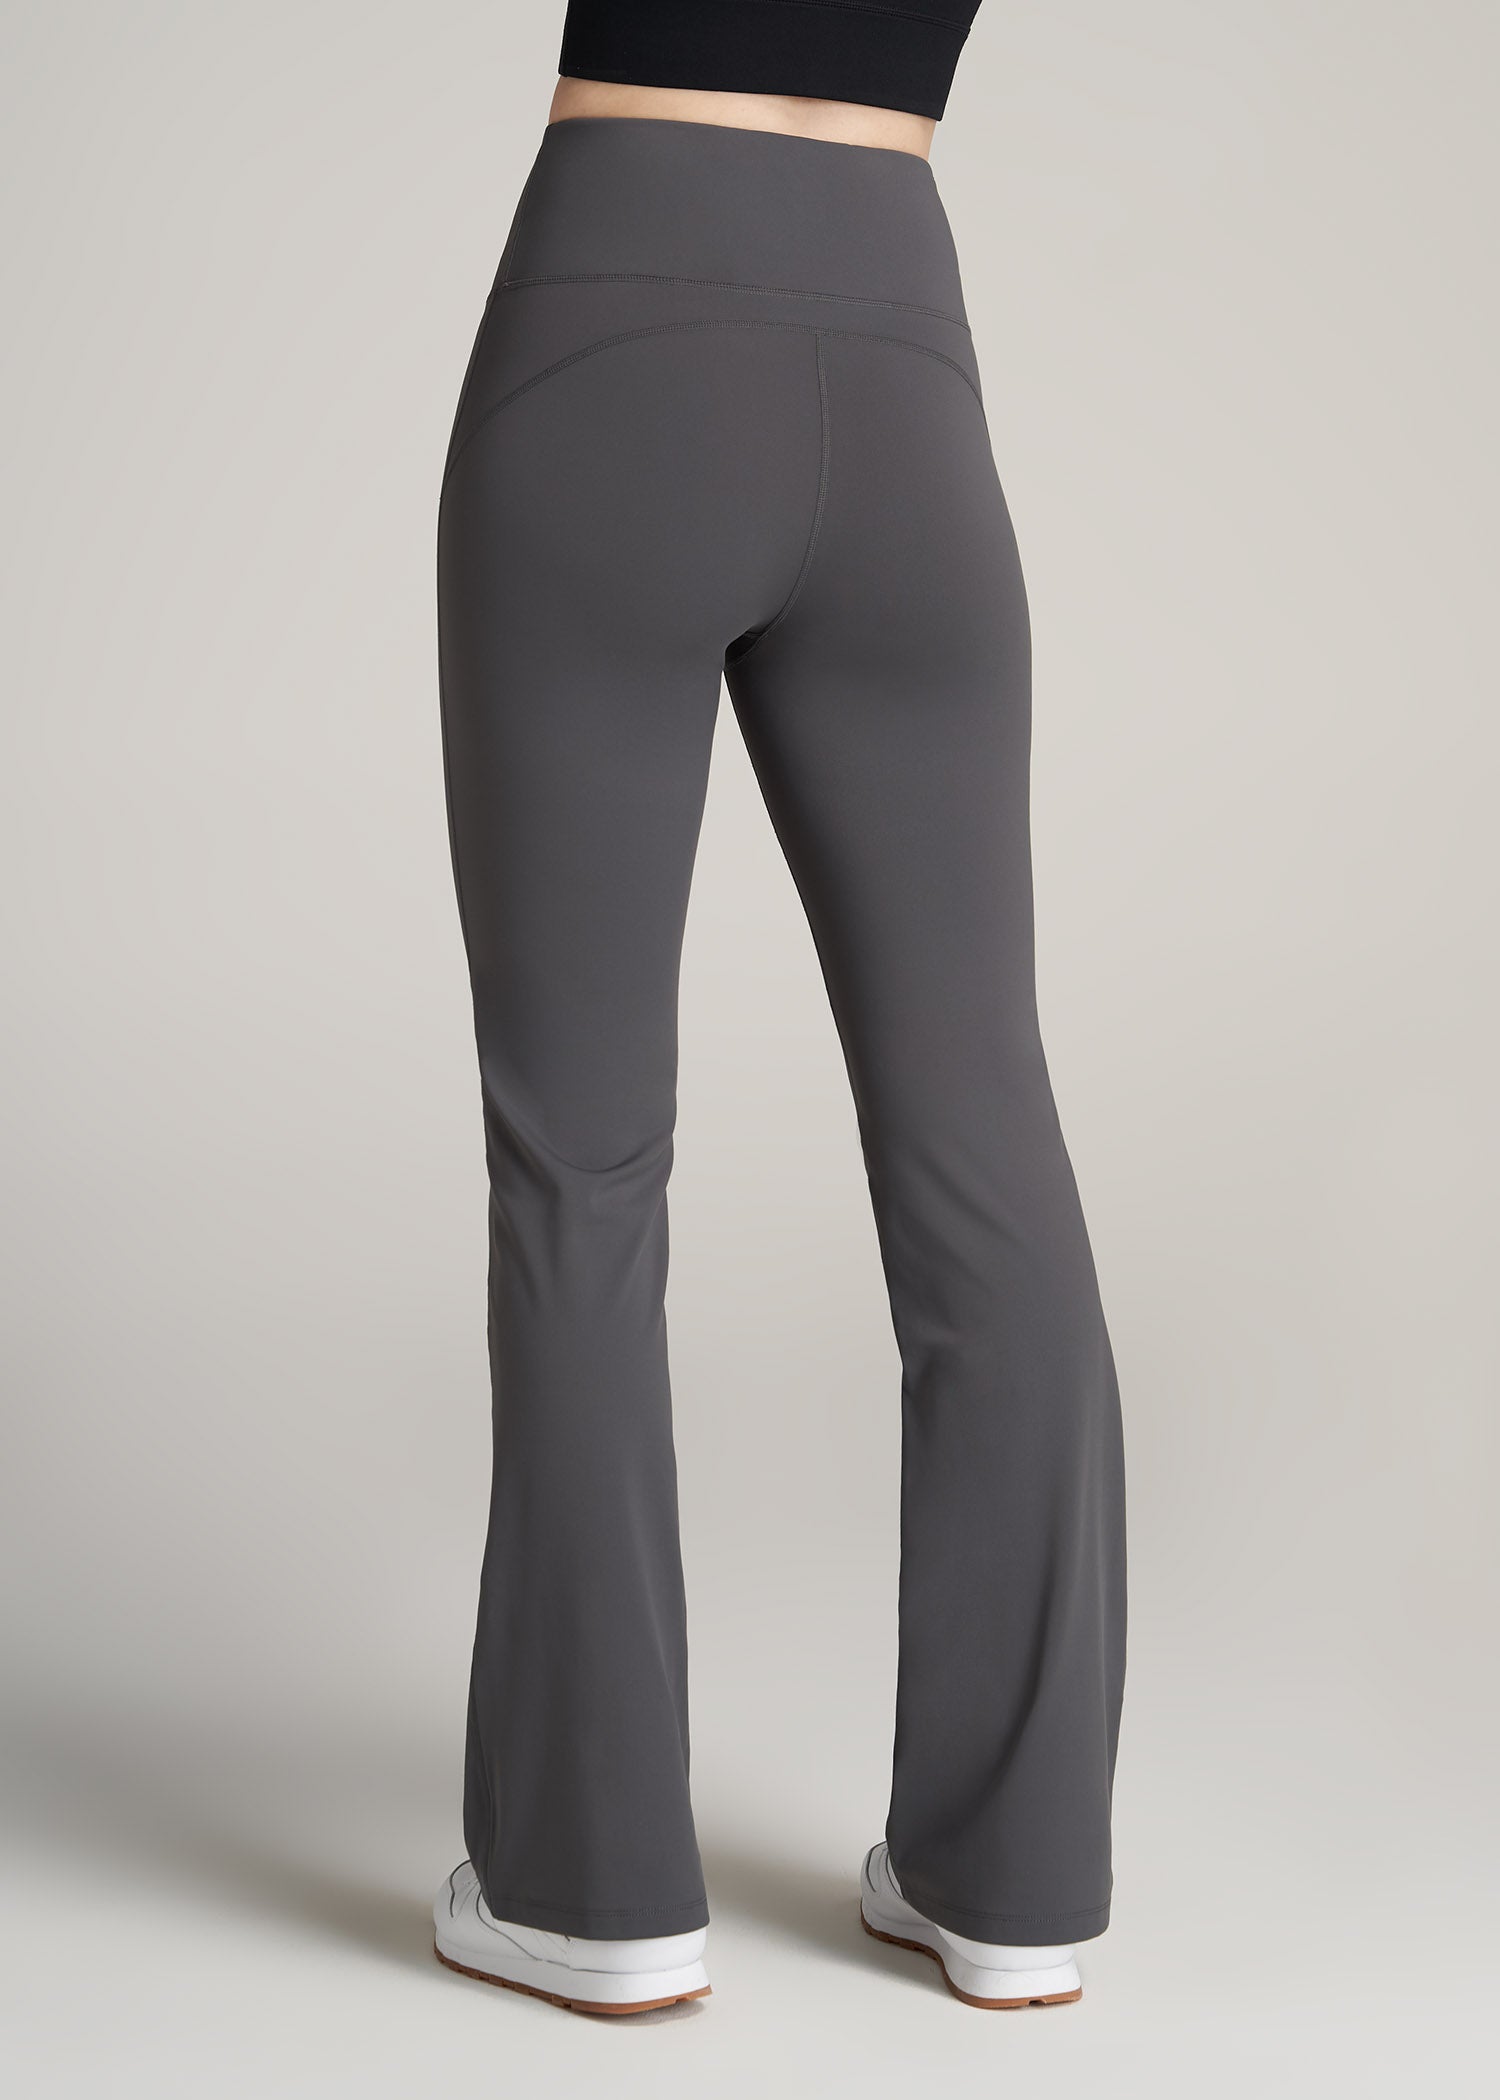 Best 25+ Deals for Tall Yoga Pants